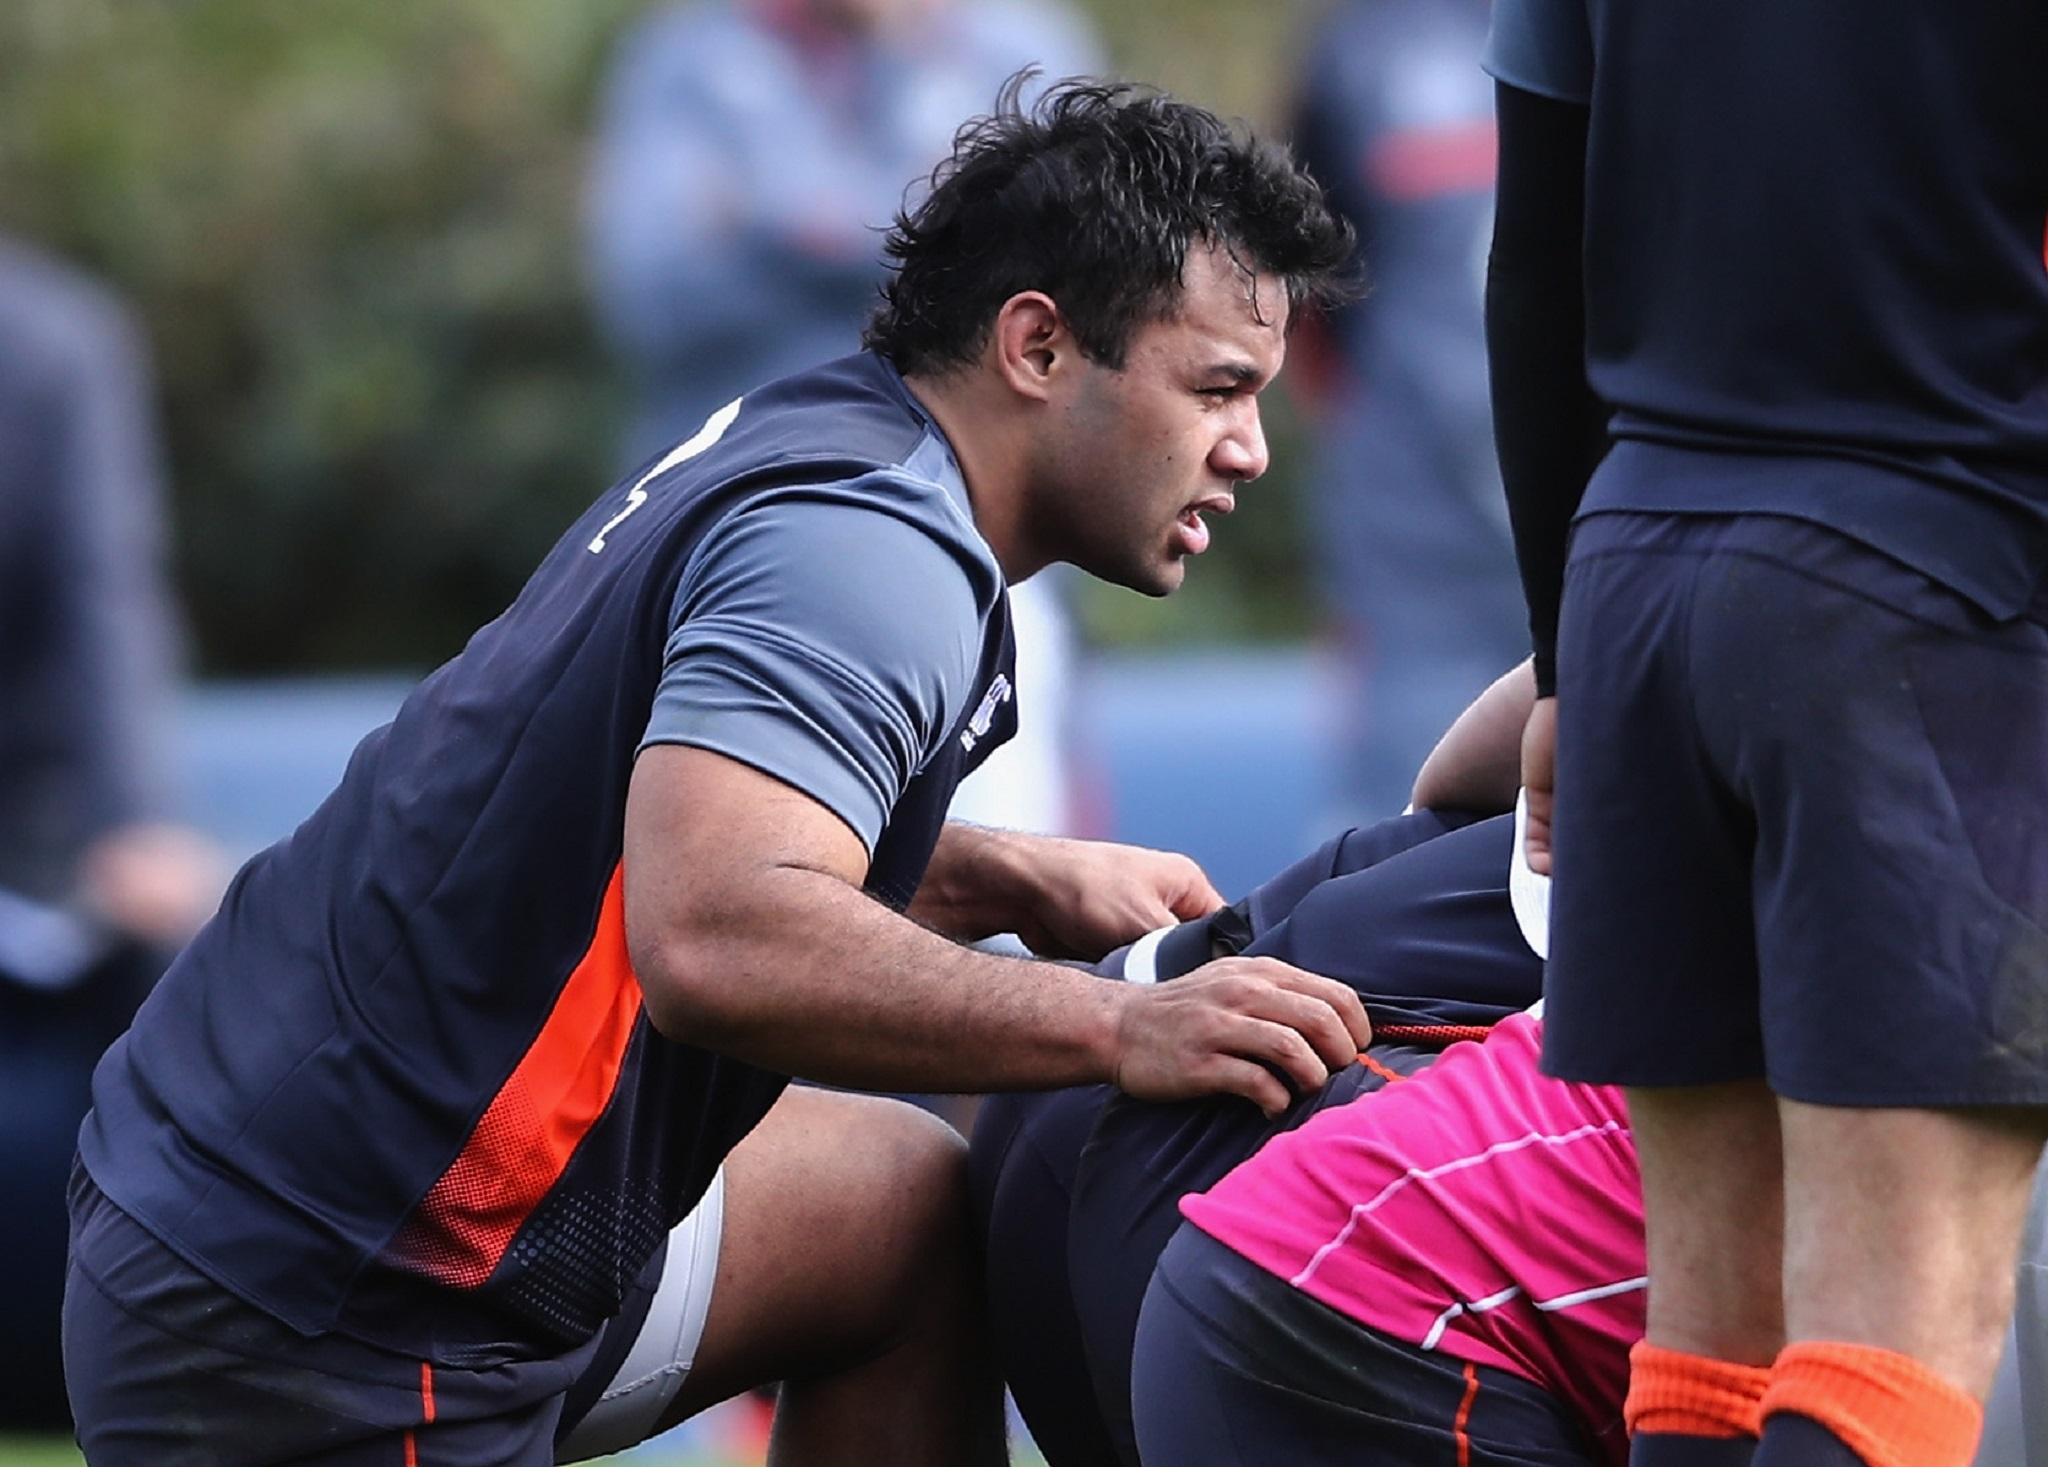 Steve Borthwick praised Billy Vunipola's diligence in his recovery from a knee injury